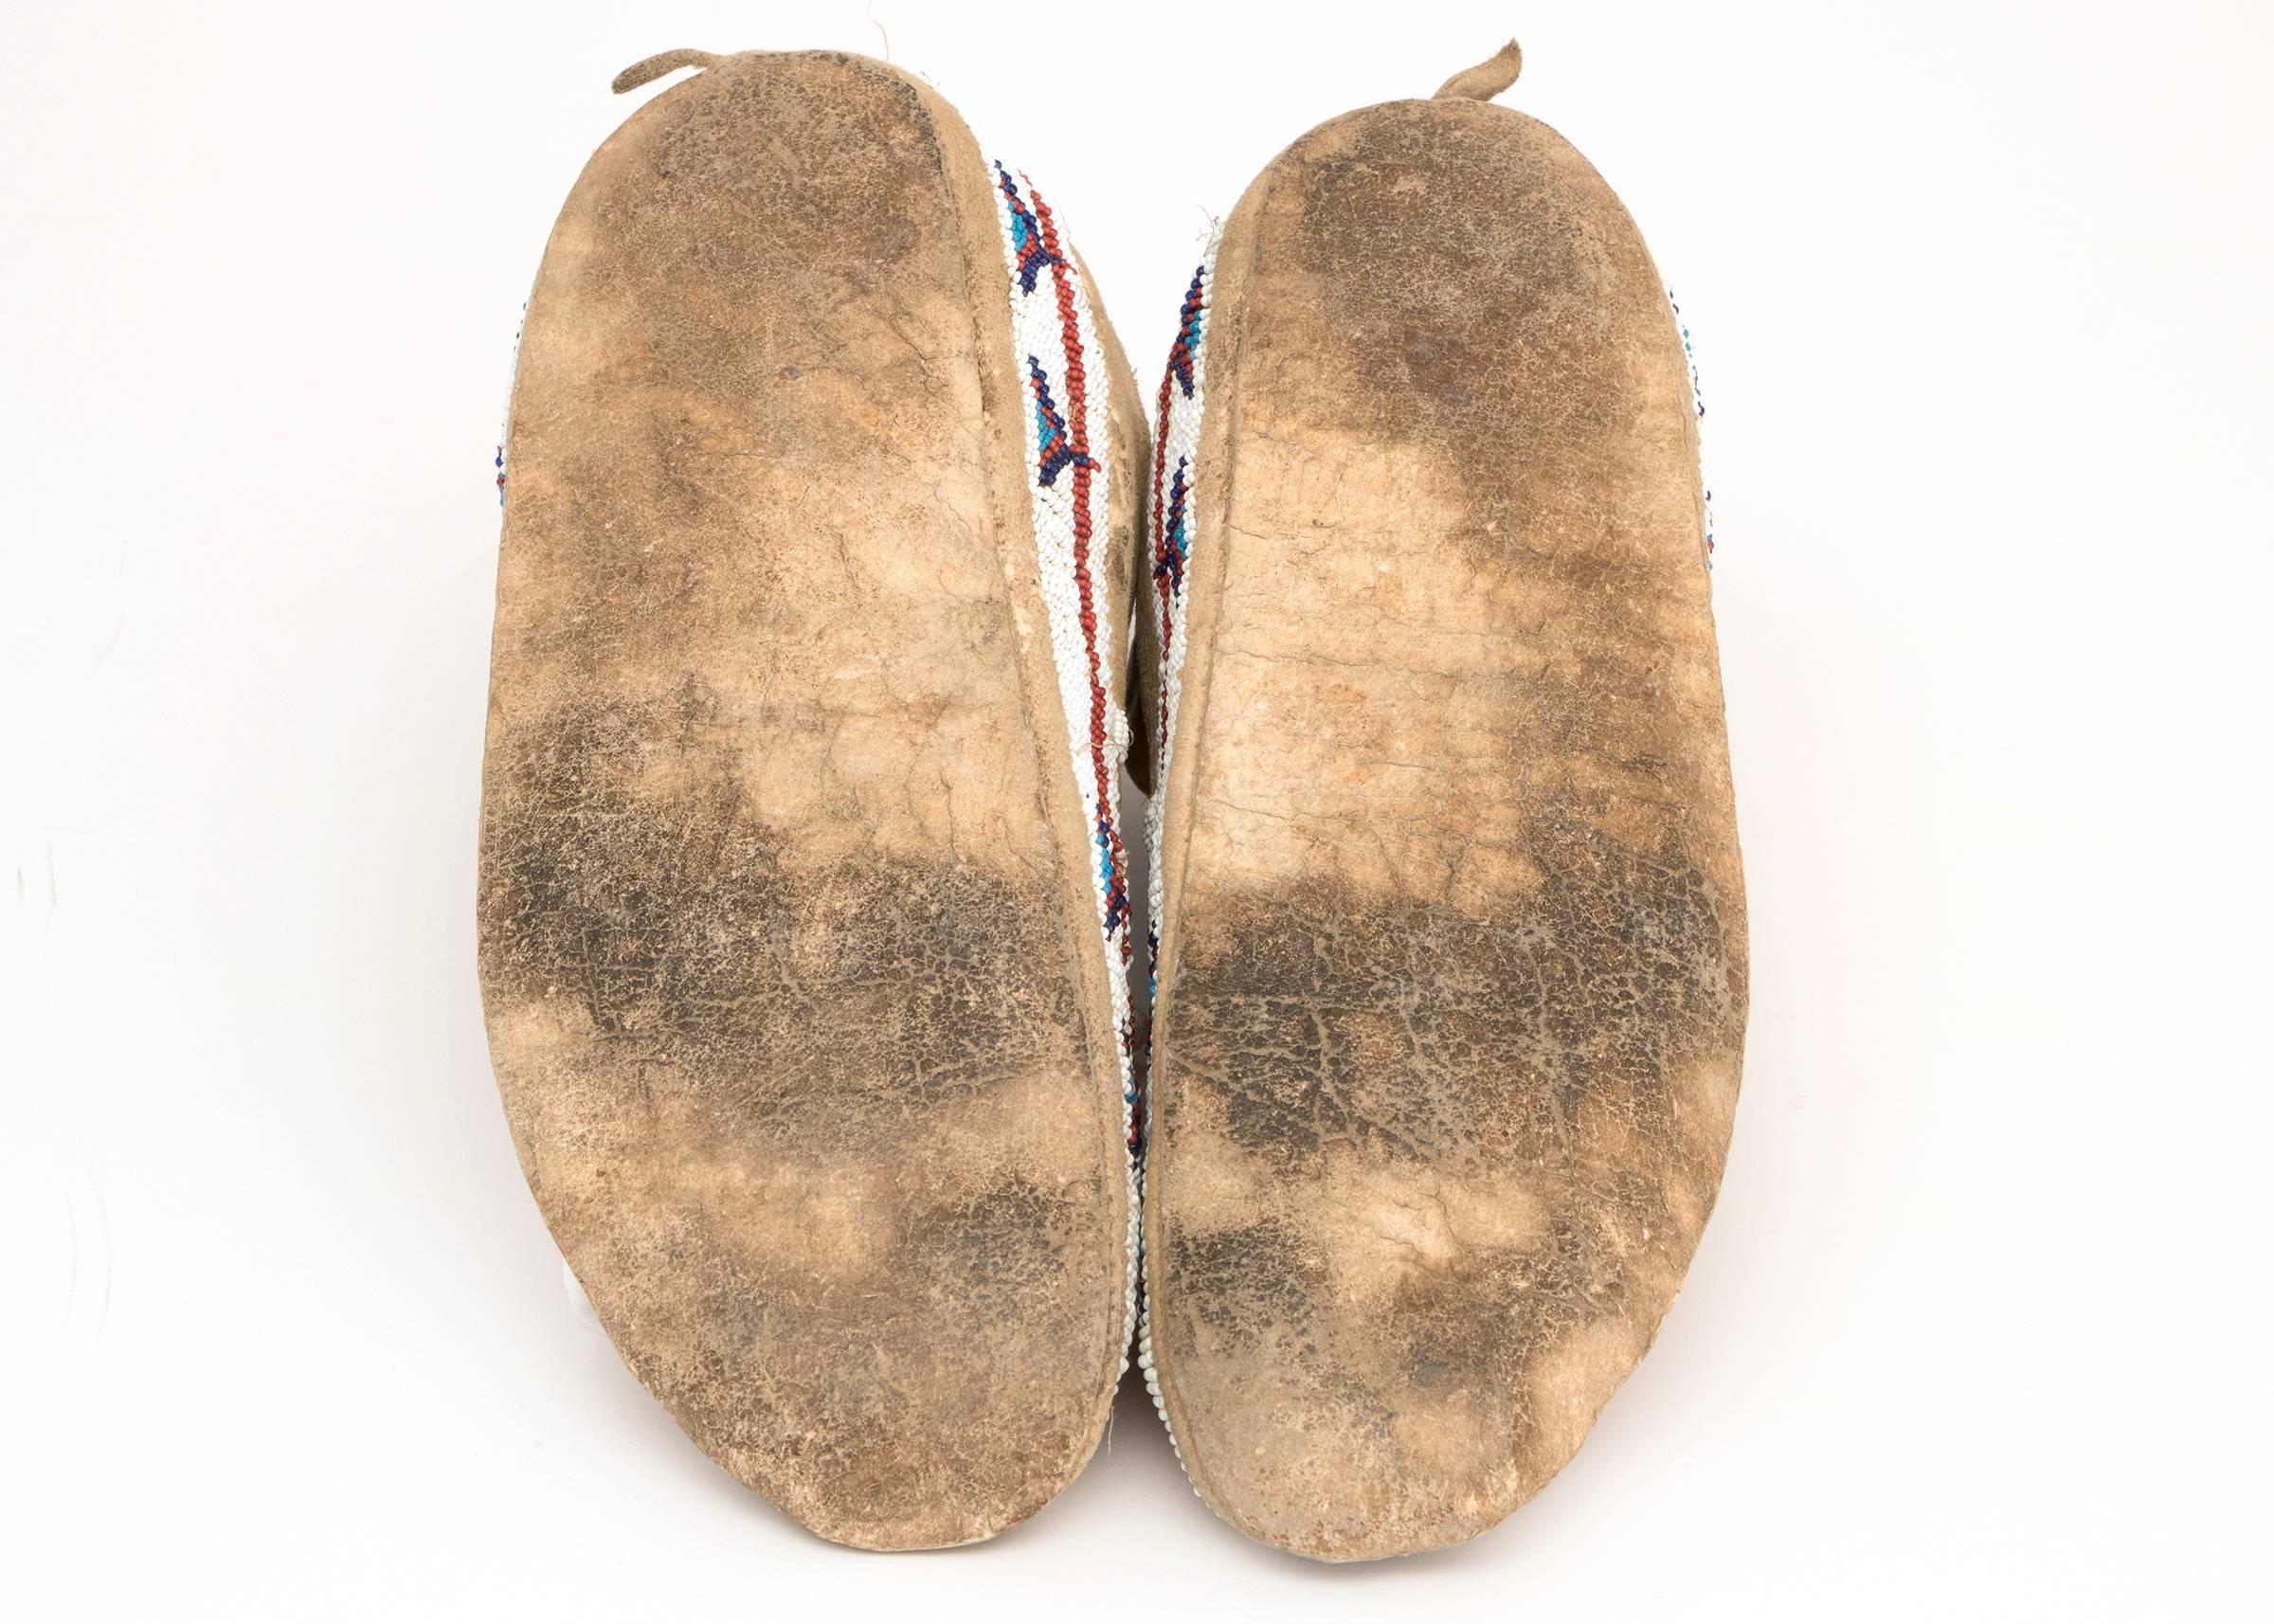 19th Century Antique Native American Beaded Moccasins, Cheyenne (Plains Indian), circa 1890